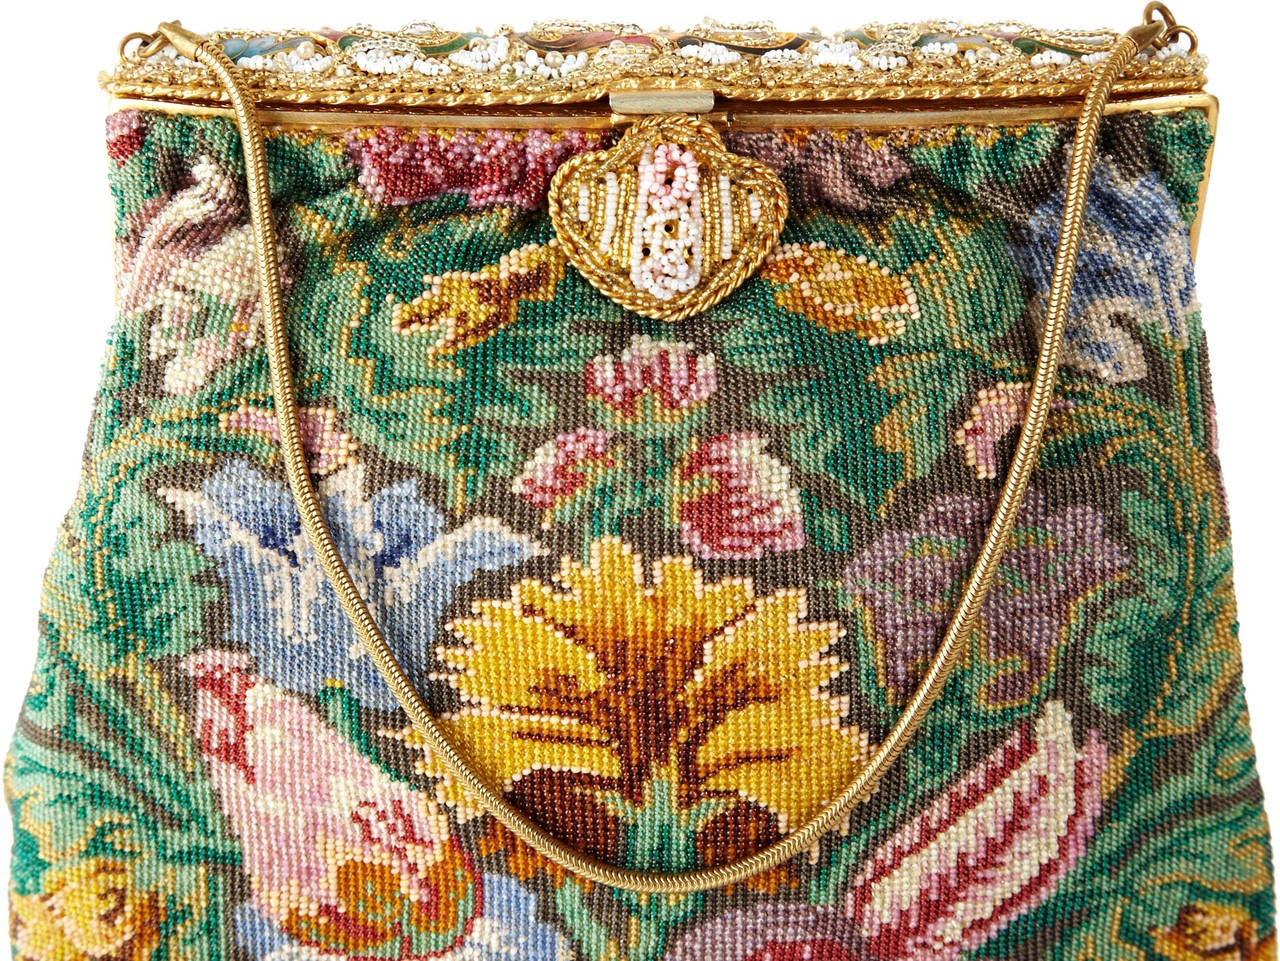 Victorian Micro Bead Floral Bag, Lined in peach satin with matching enamel plaques and seed pearl frame in milk, gold and pearl seed beads. Original micro bead floral bag body made circa 1890 with a attractive frame remount circa 1950.
9